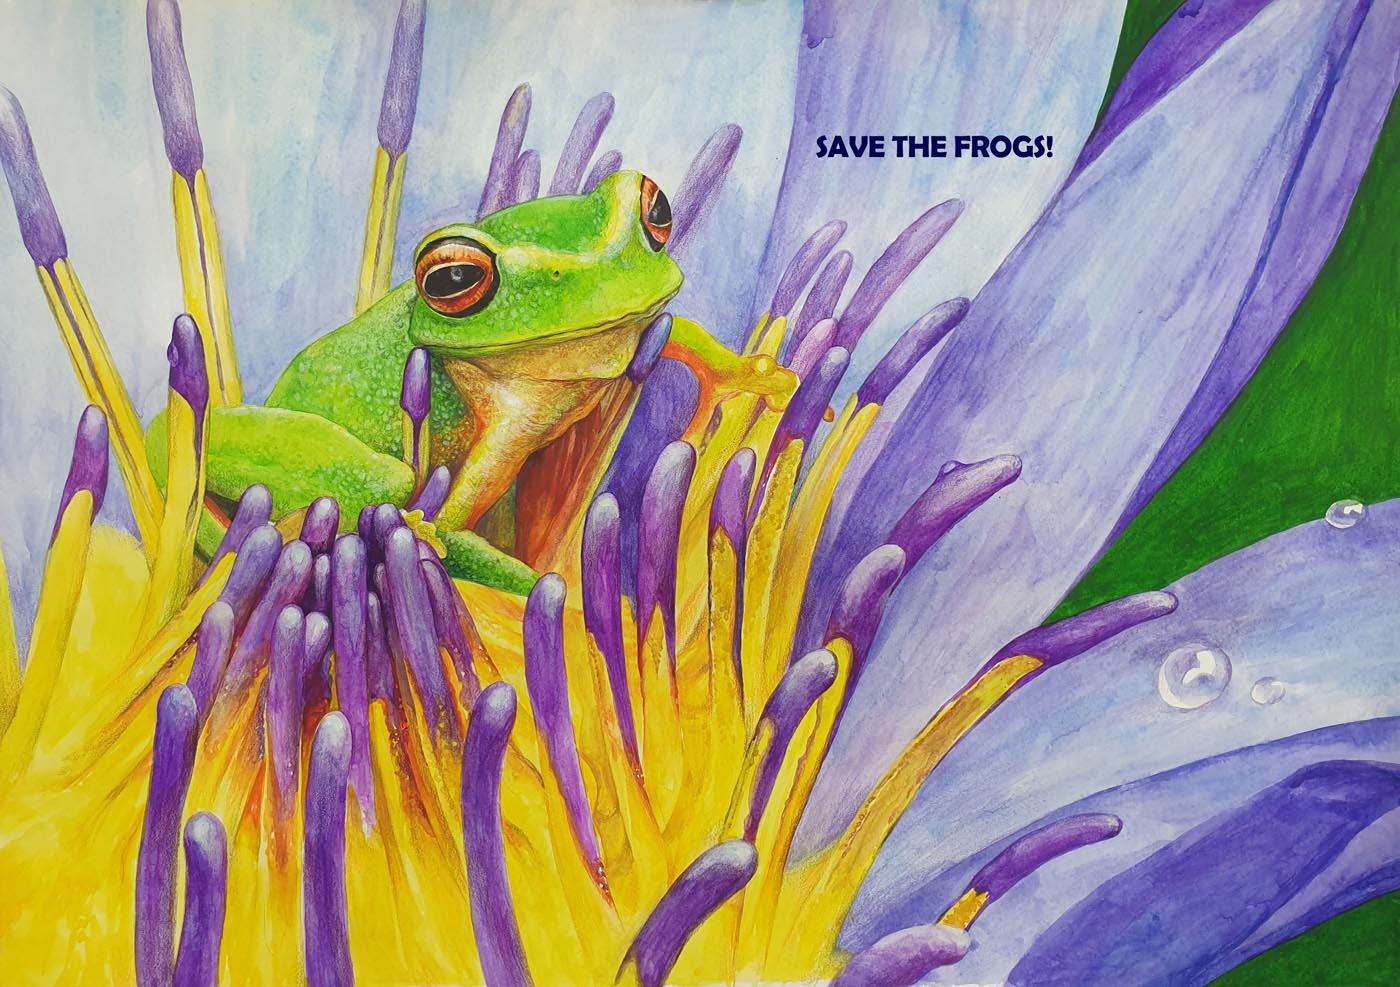 Hyunseo-Lee-South Korea-2021-save-the-frogs-art-contest 2nd Place Winner